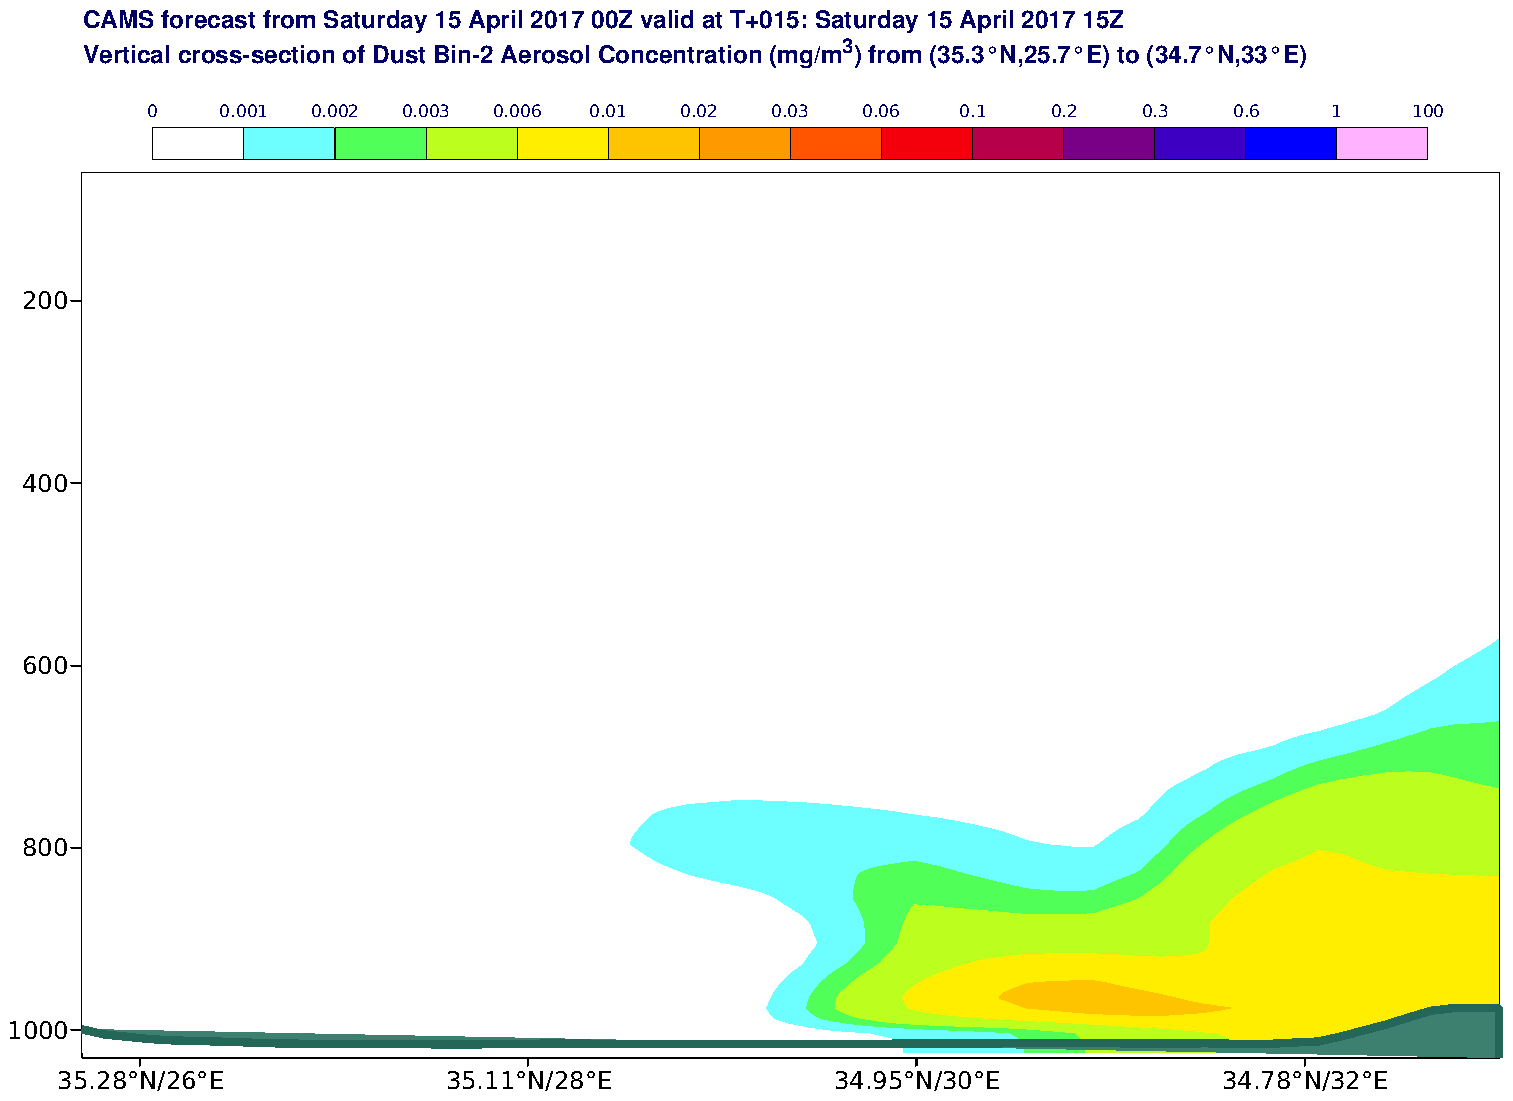 Vertical cross-section of Dust Bin-2 Aerosol Concentration (mg/m3) valid at T15 - 2017-04-15 15:00